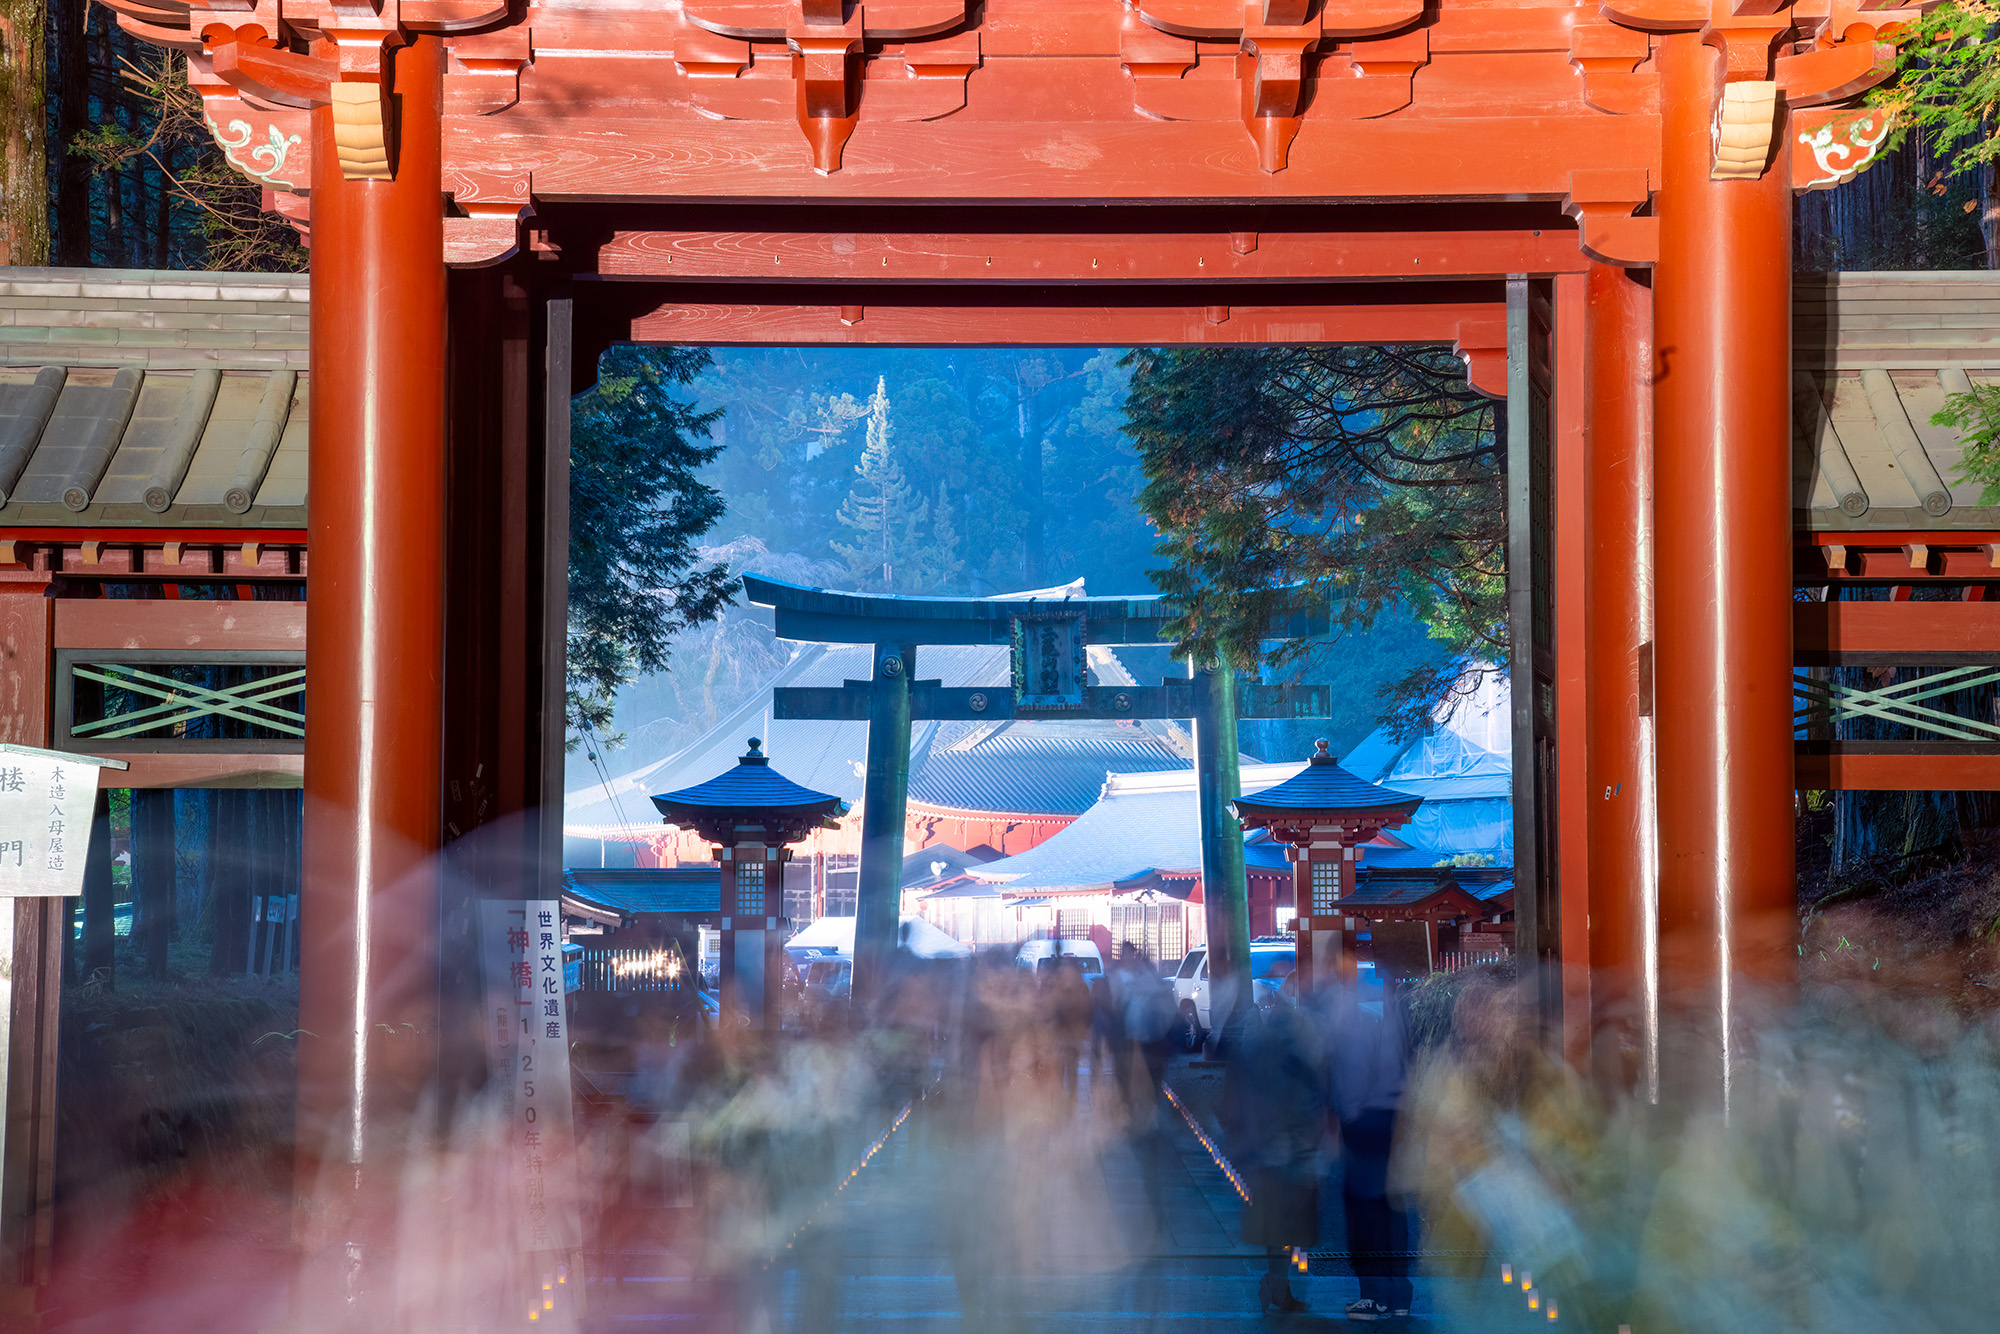 Amidst the bustling excitement of one of Nikko's enchanting evenings when the temples are bathed in light, this image captures...